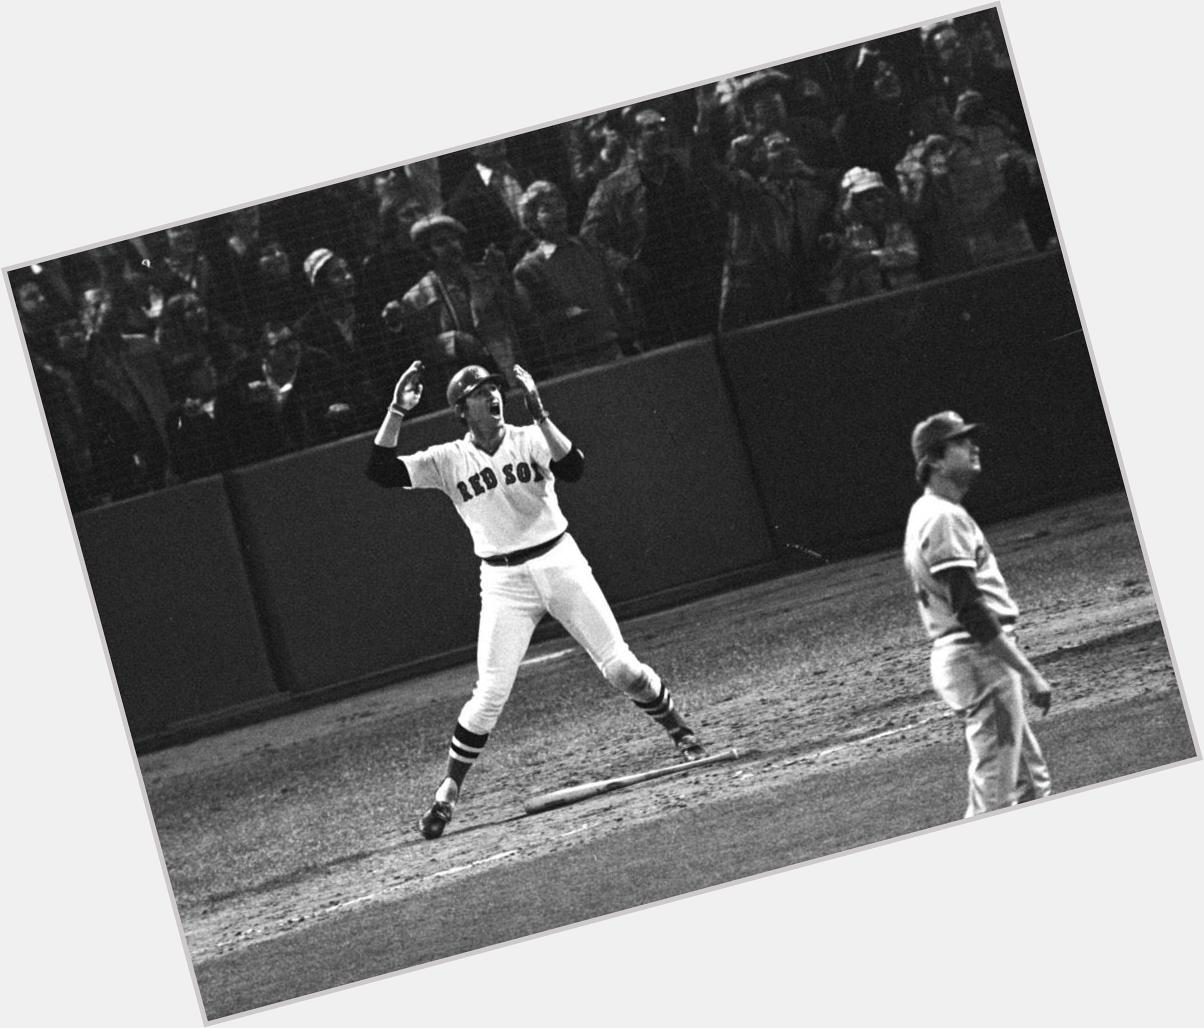 Happy birthday to one of the best baseball players of all time, Carlton Fisk 